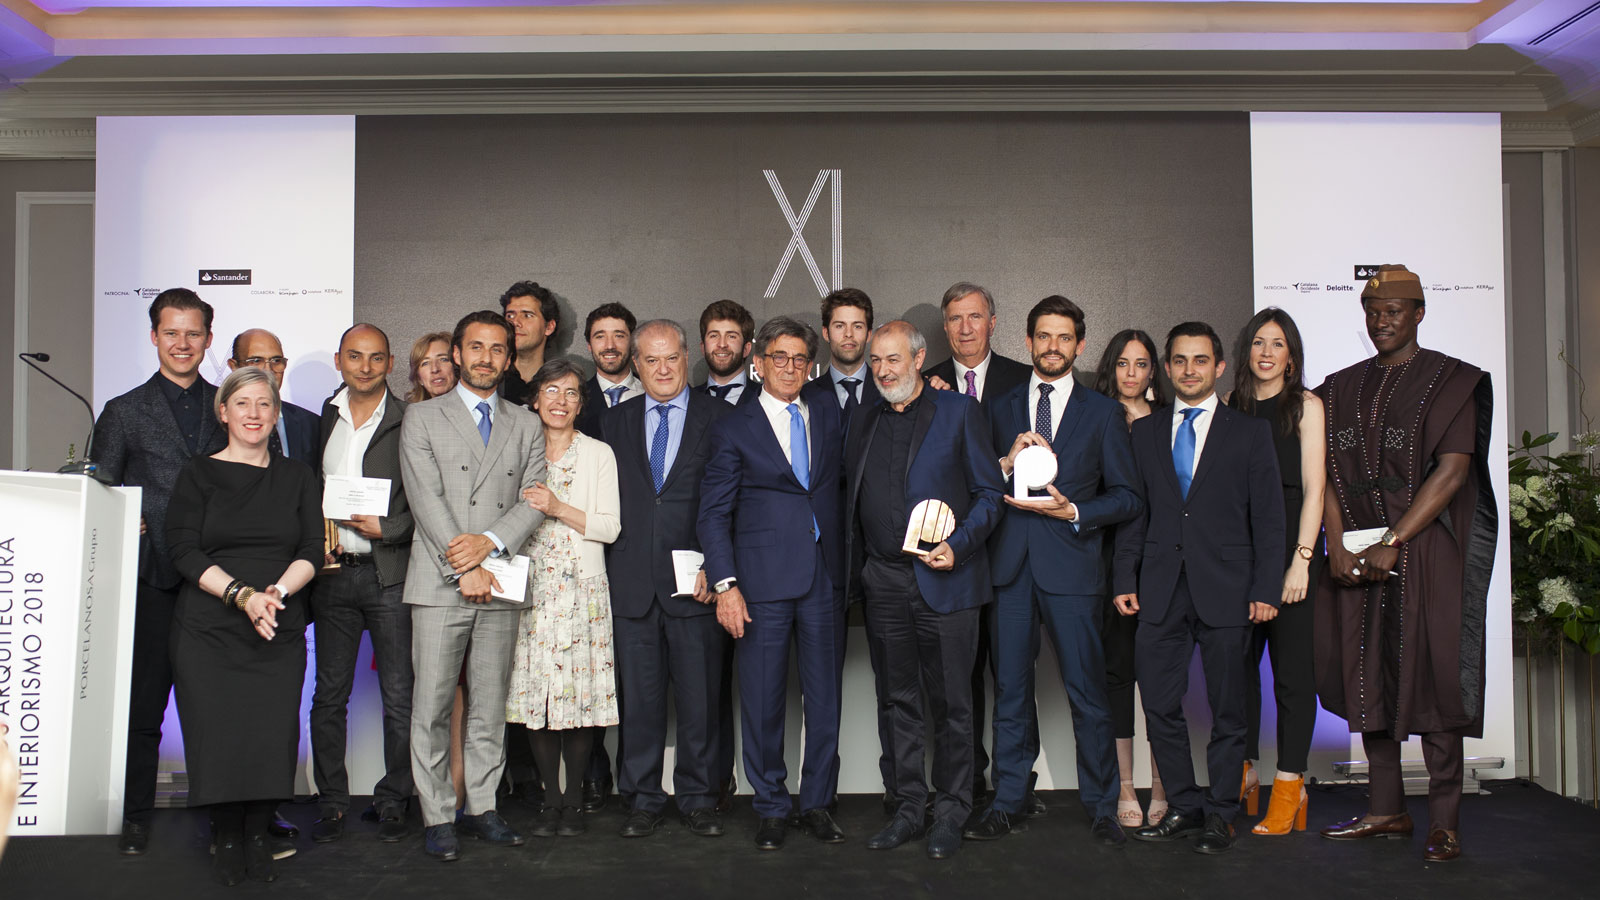 We find out who the winners were at the 11th Porcelanosa Awards